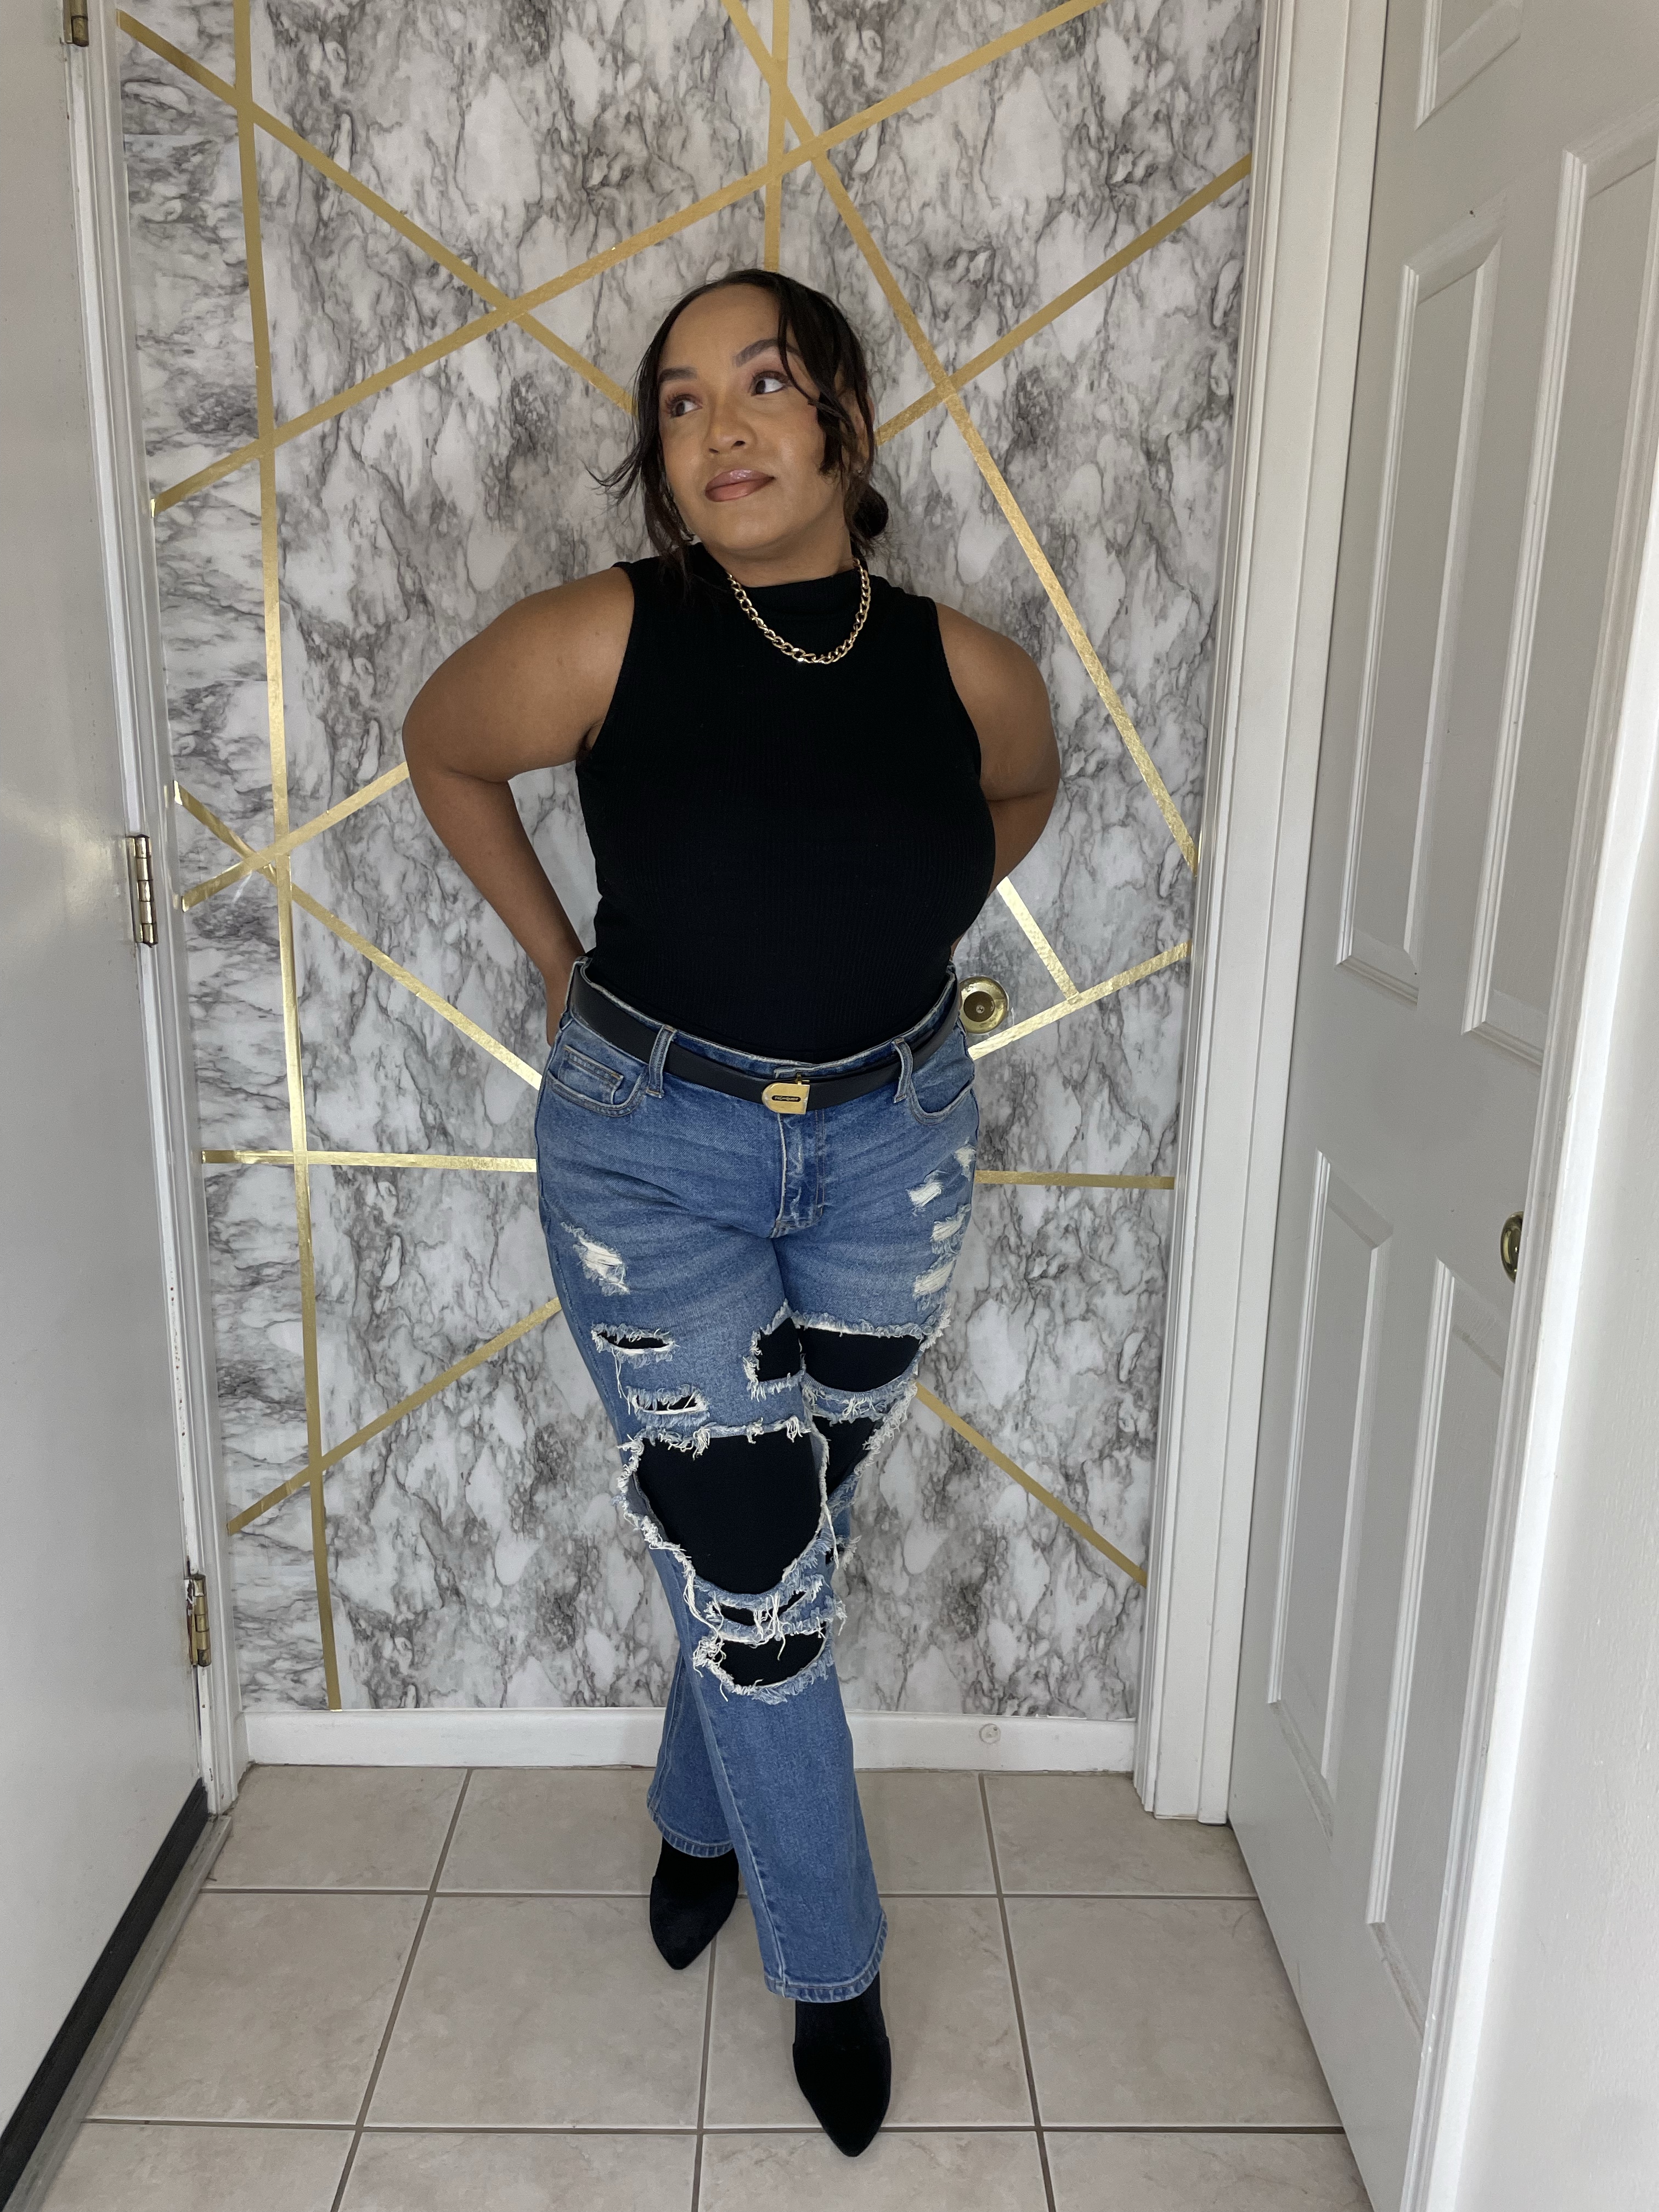 pinterest outfits, recreating pinterest outfits, recreating pinterest outfits from Shein, that girl outfit ideas, that girl aesthetic, Spring 2023 outfits, Summer 2023 outfits, lifestyle blogger aesthetic, black girl fashion, black women fashion, high value woman aesthetic